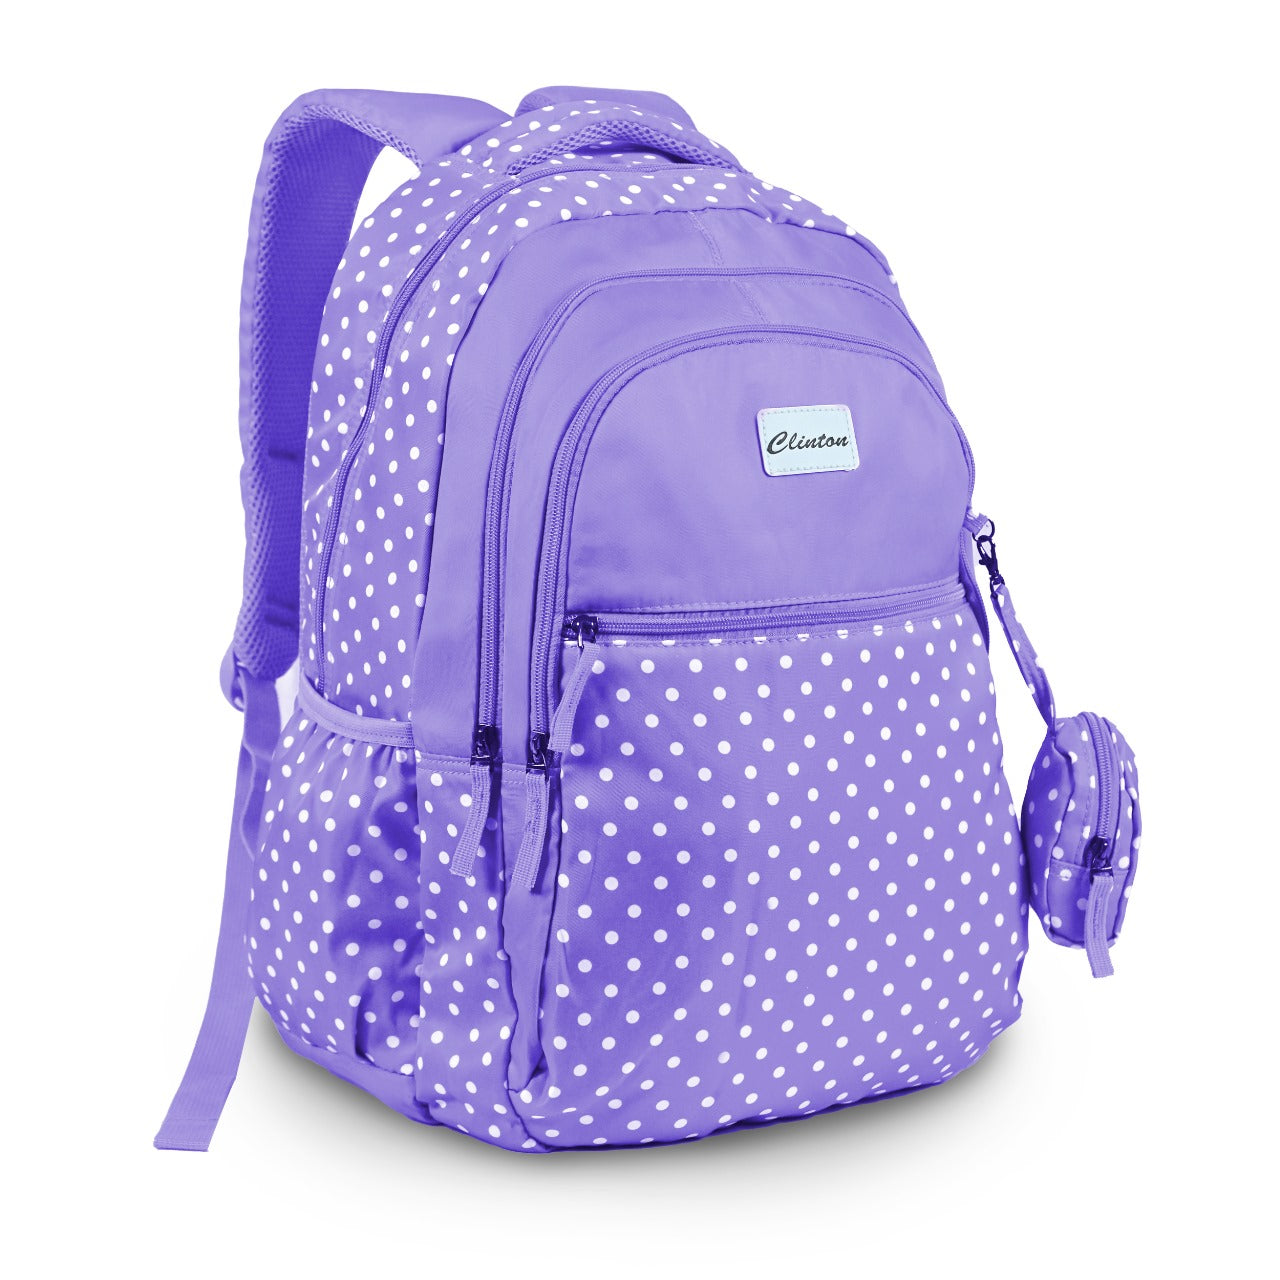 Buy 1 Get 1 Free | Multi Zipper Espiral Polka Dotted Backpack Bag with Pouch